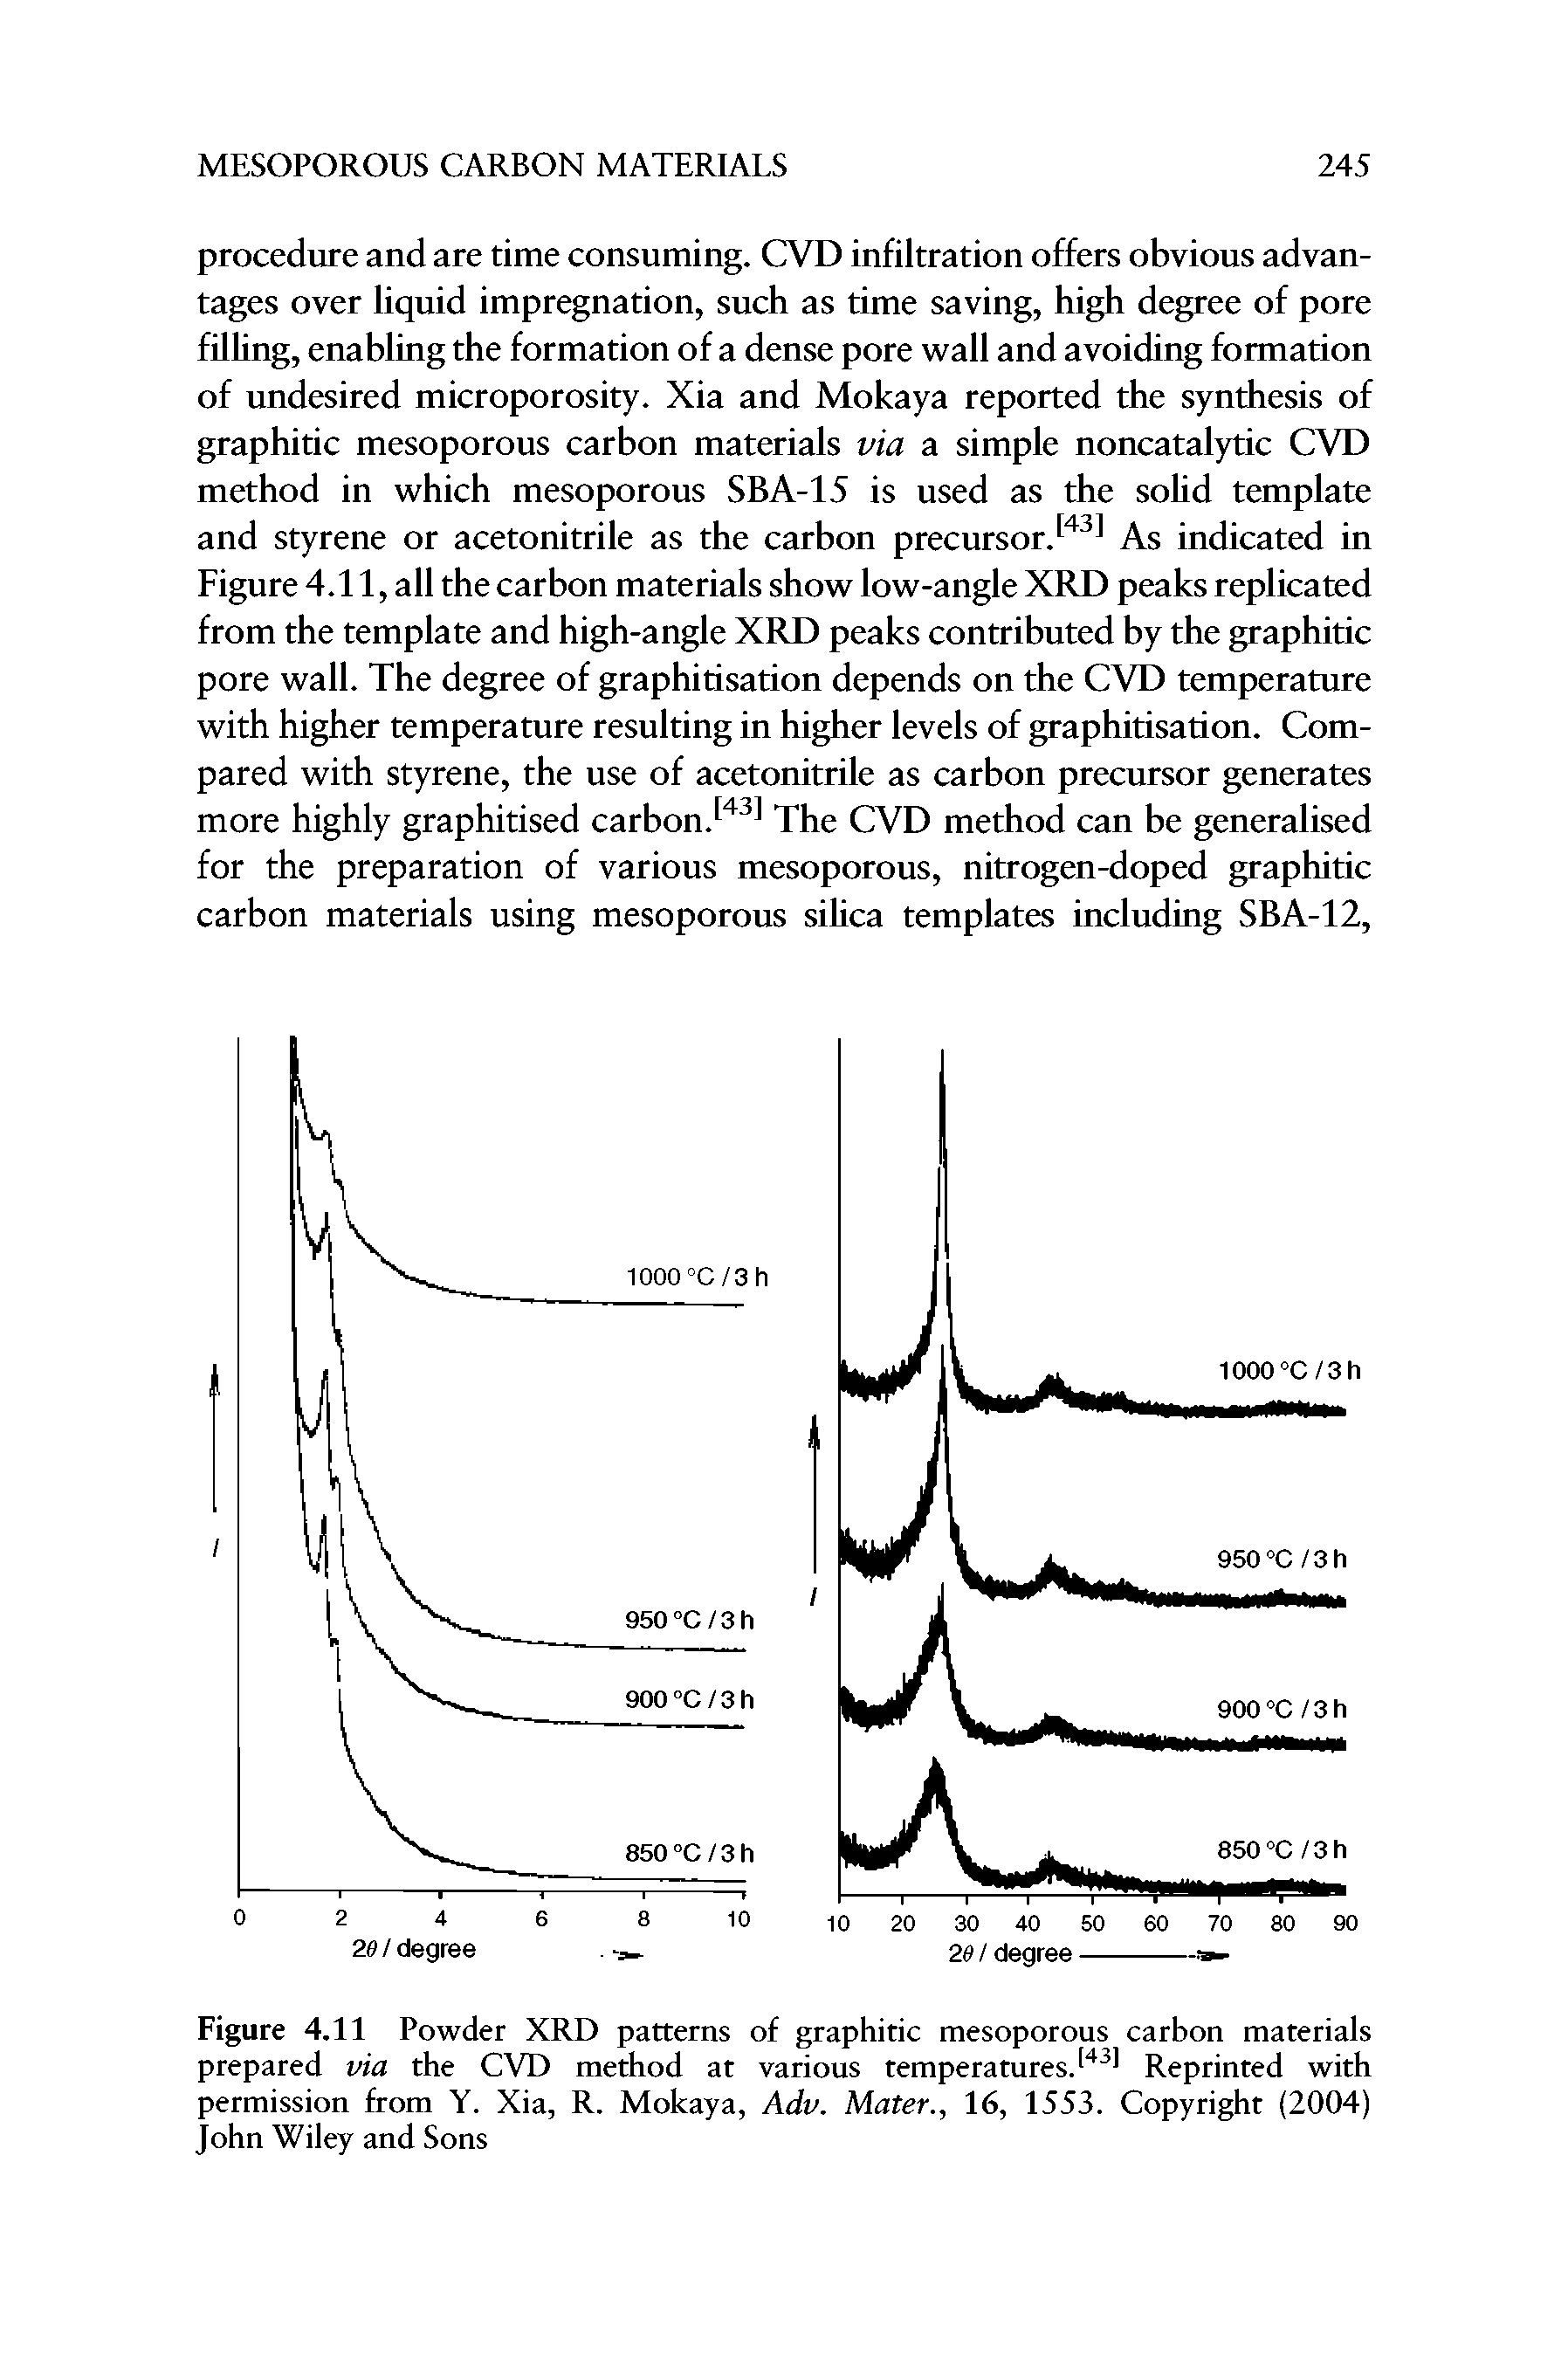 Figure 4.11 Powder XRD patterns of graphitic mesoporous carbon materials prepared via the CVD method at various temperatures. Reprinted with permission from Y. Xia, R. Mokaya, Adv. Mater., 16, 1553. Copyright (2004) John Wiley and Sons...